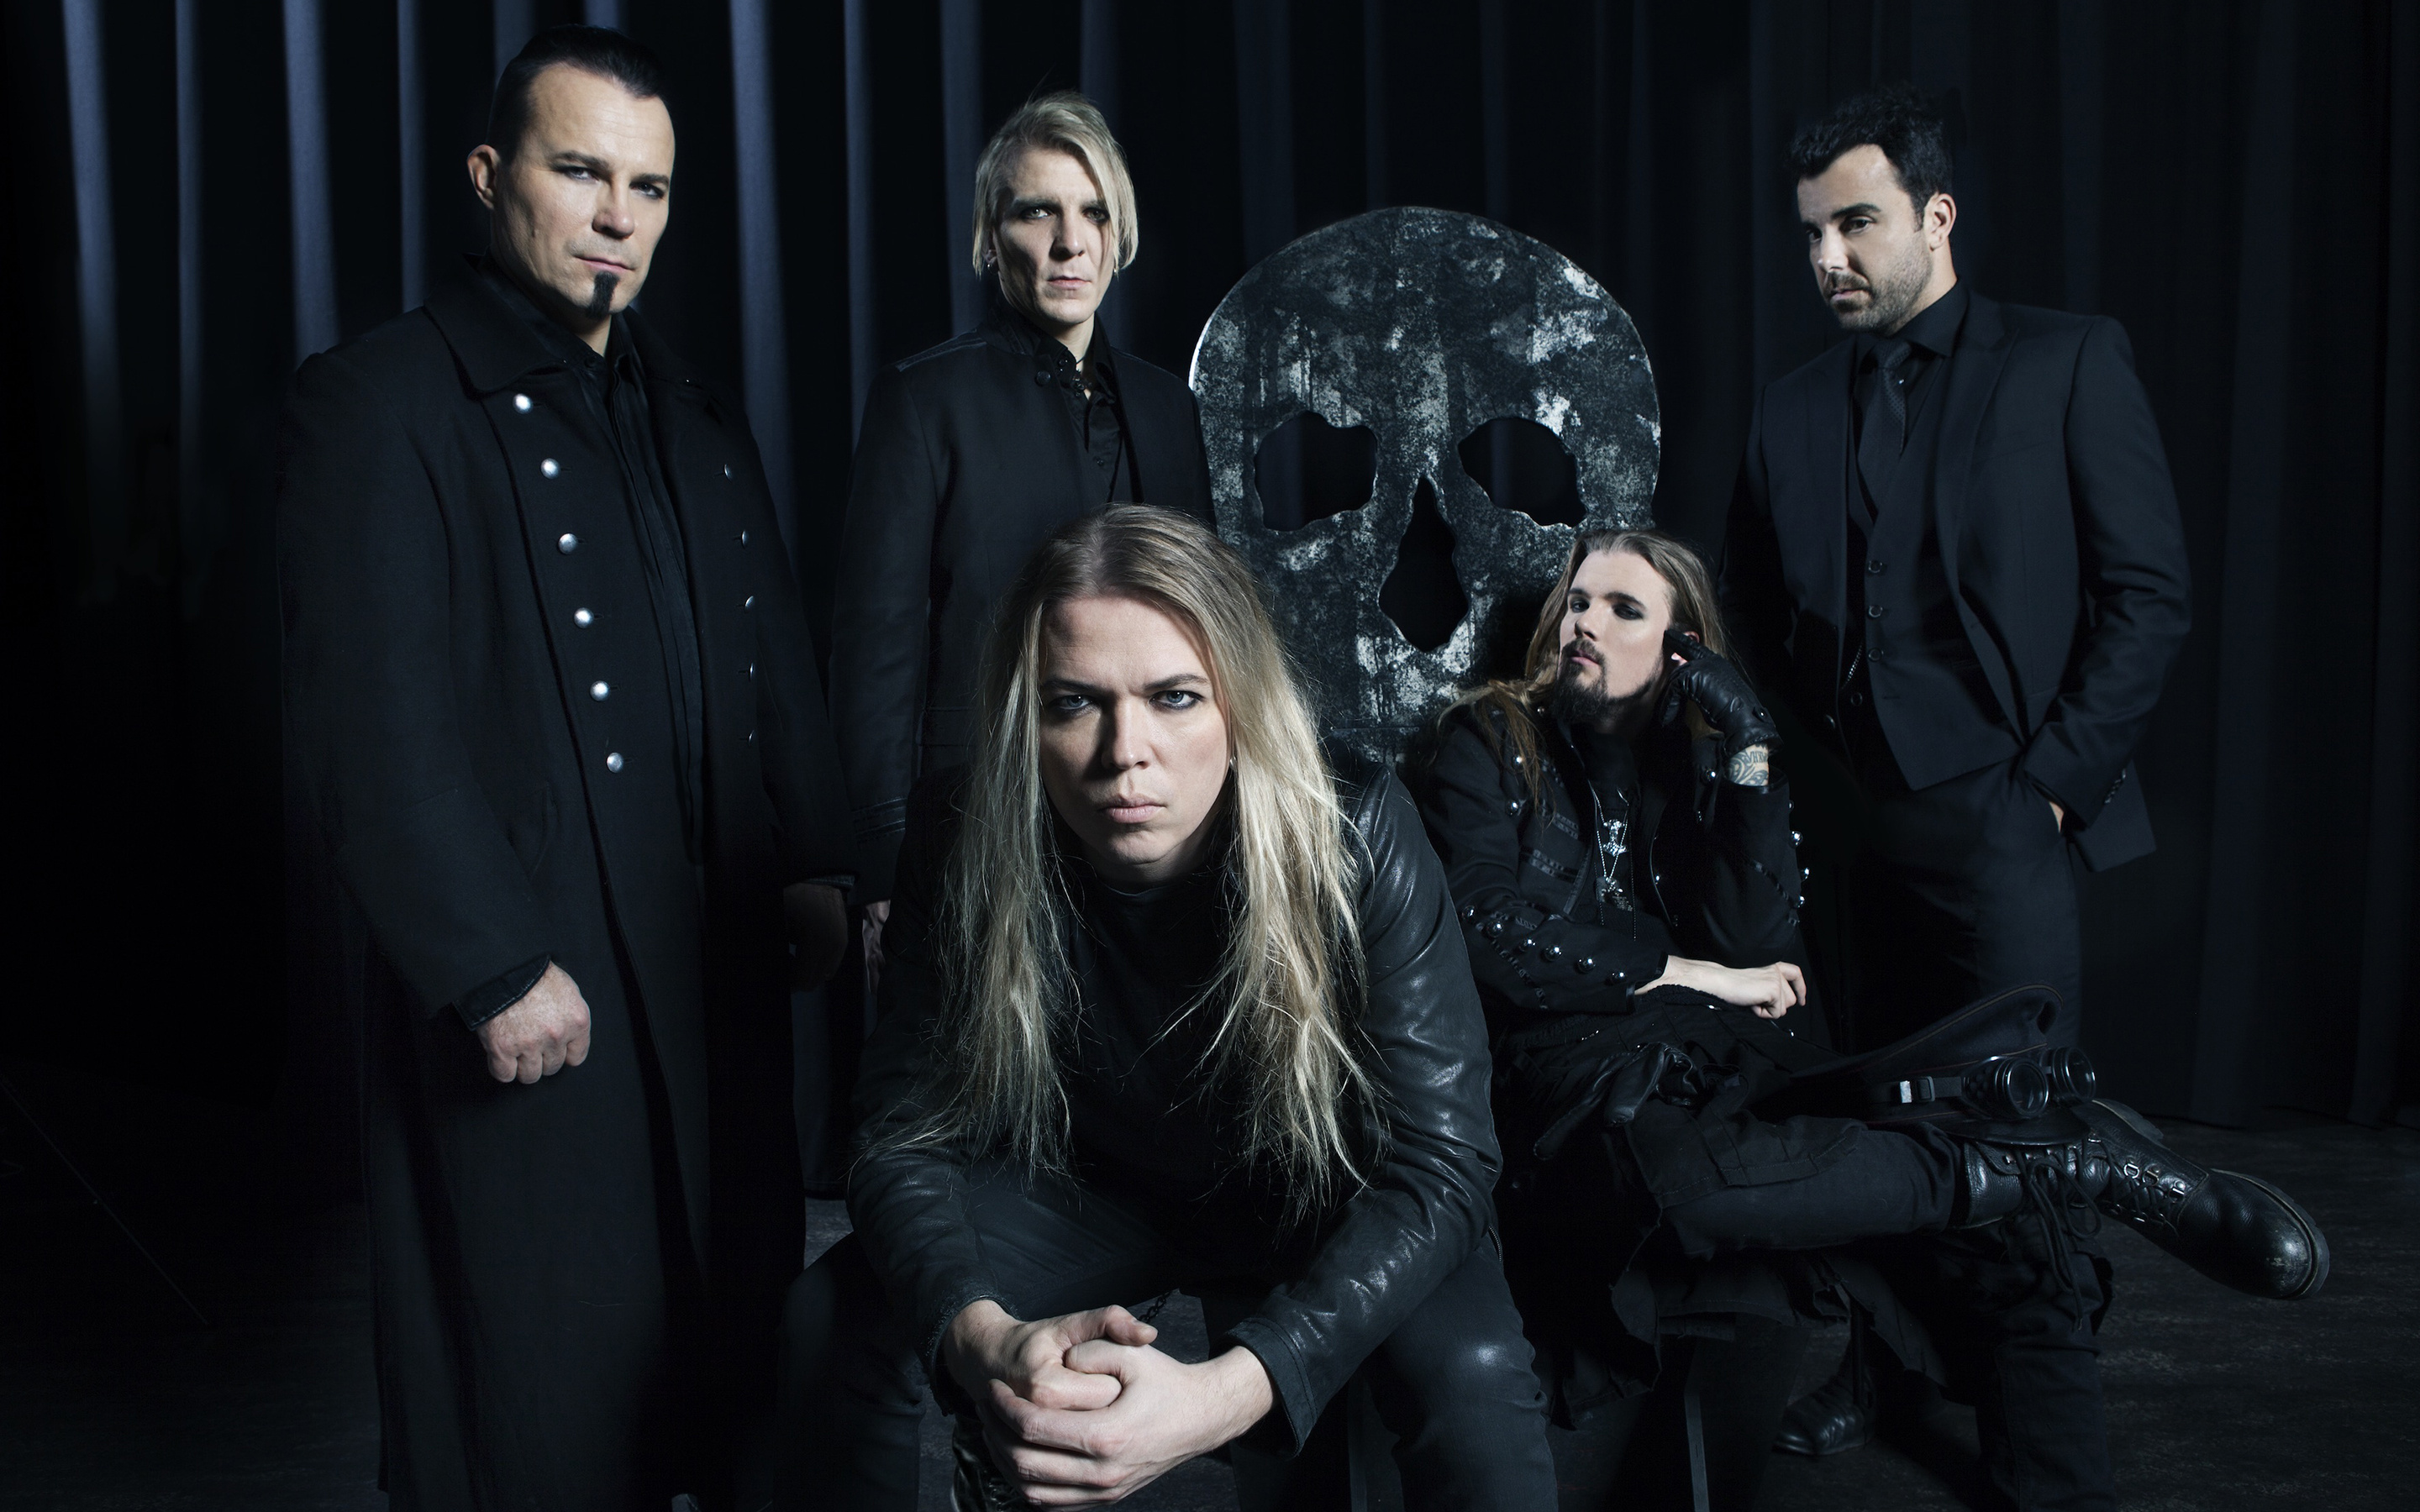 Apocalyptica band, HD wallpapers, Rock music backgrounds, Captivating visuals, 2880x1800 HD Desktop